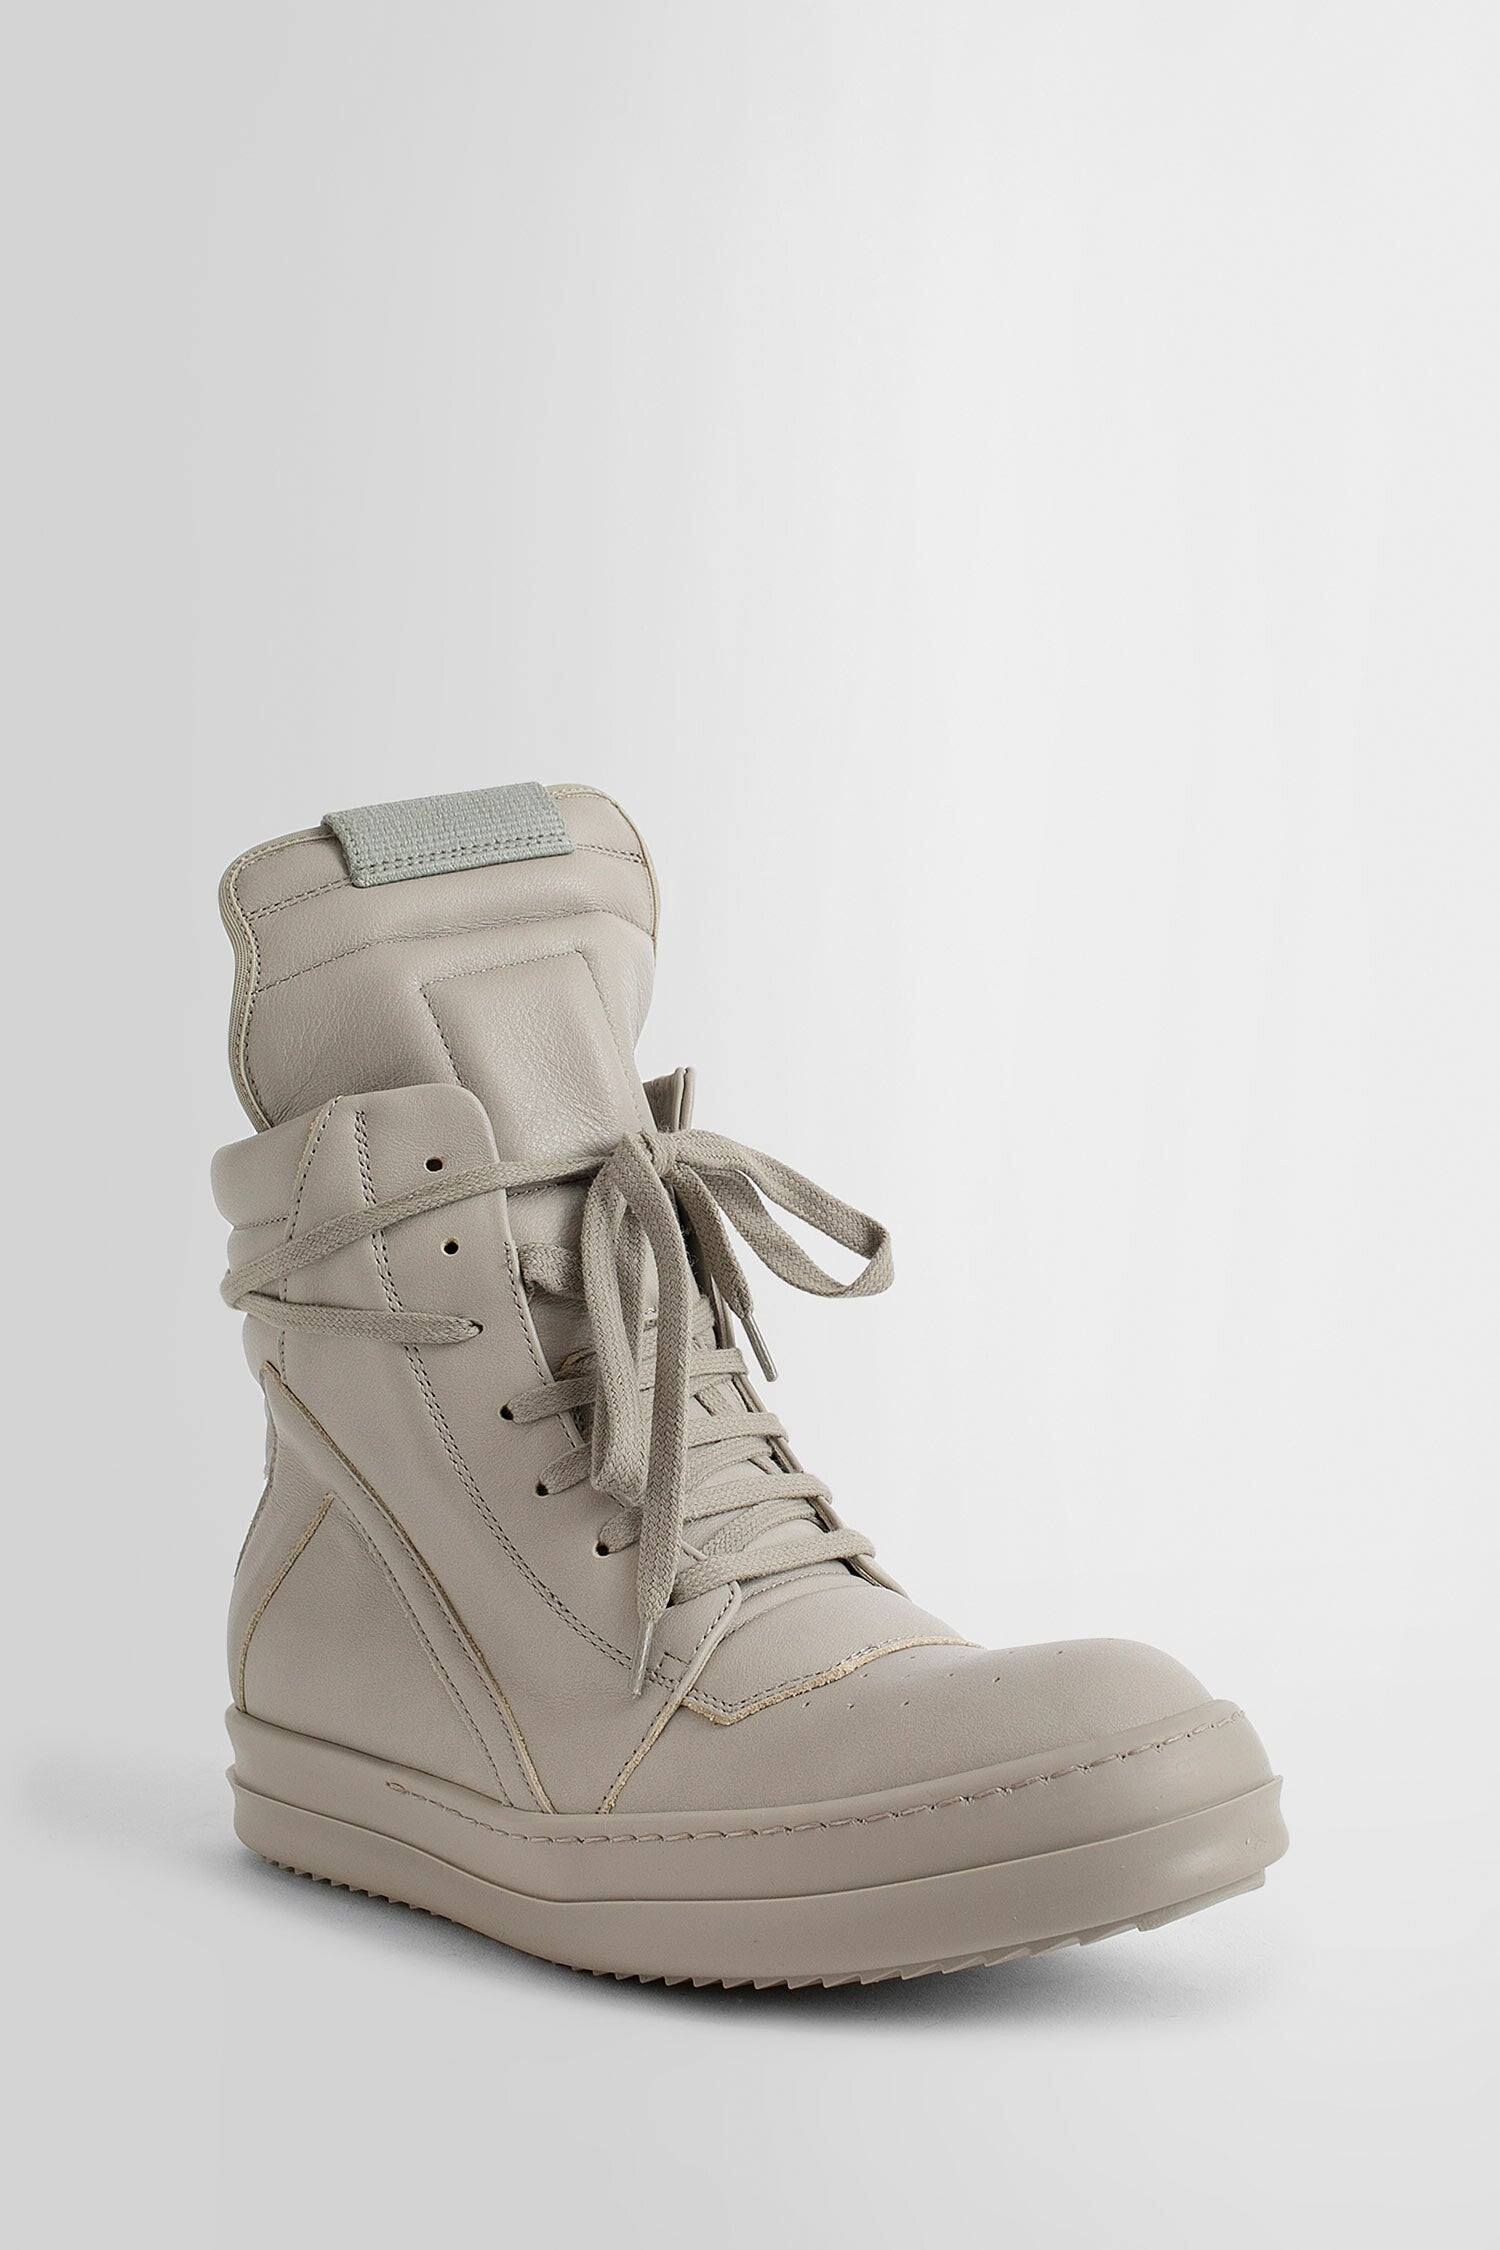 RICK OWENS WOMAN OFF-WHITE SNEAKERS